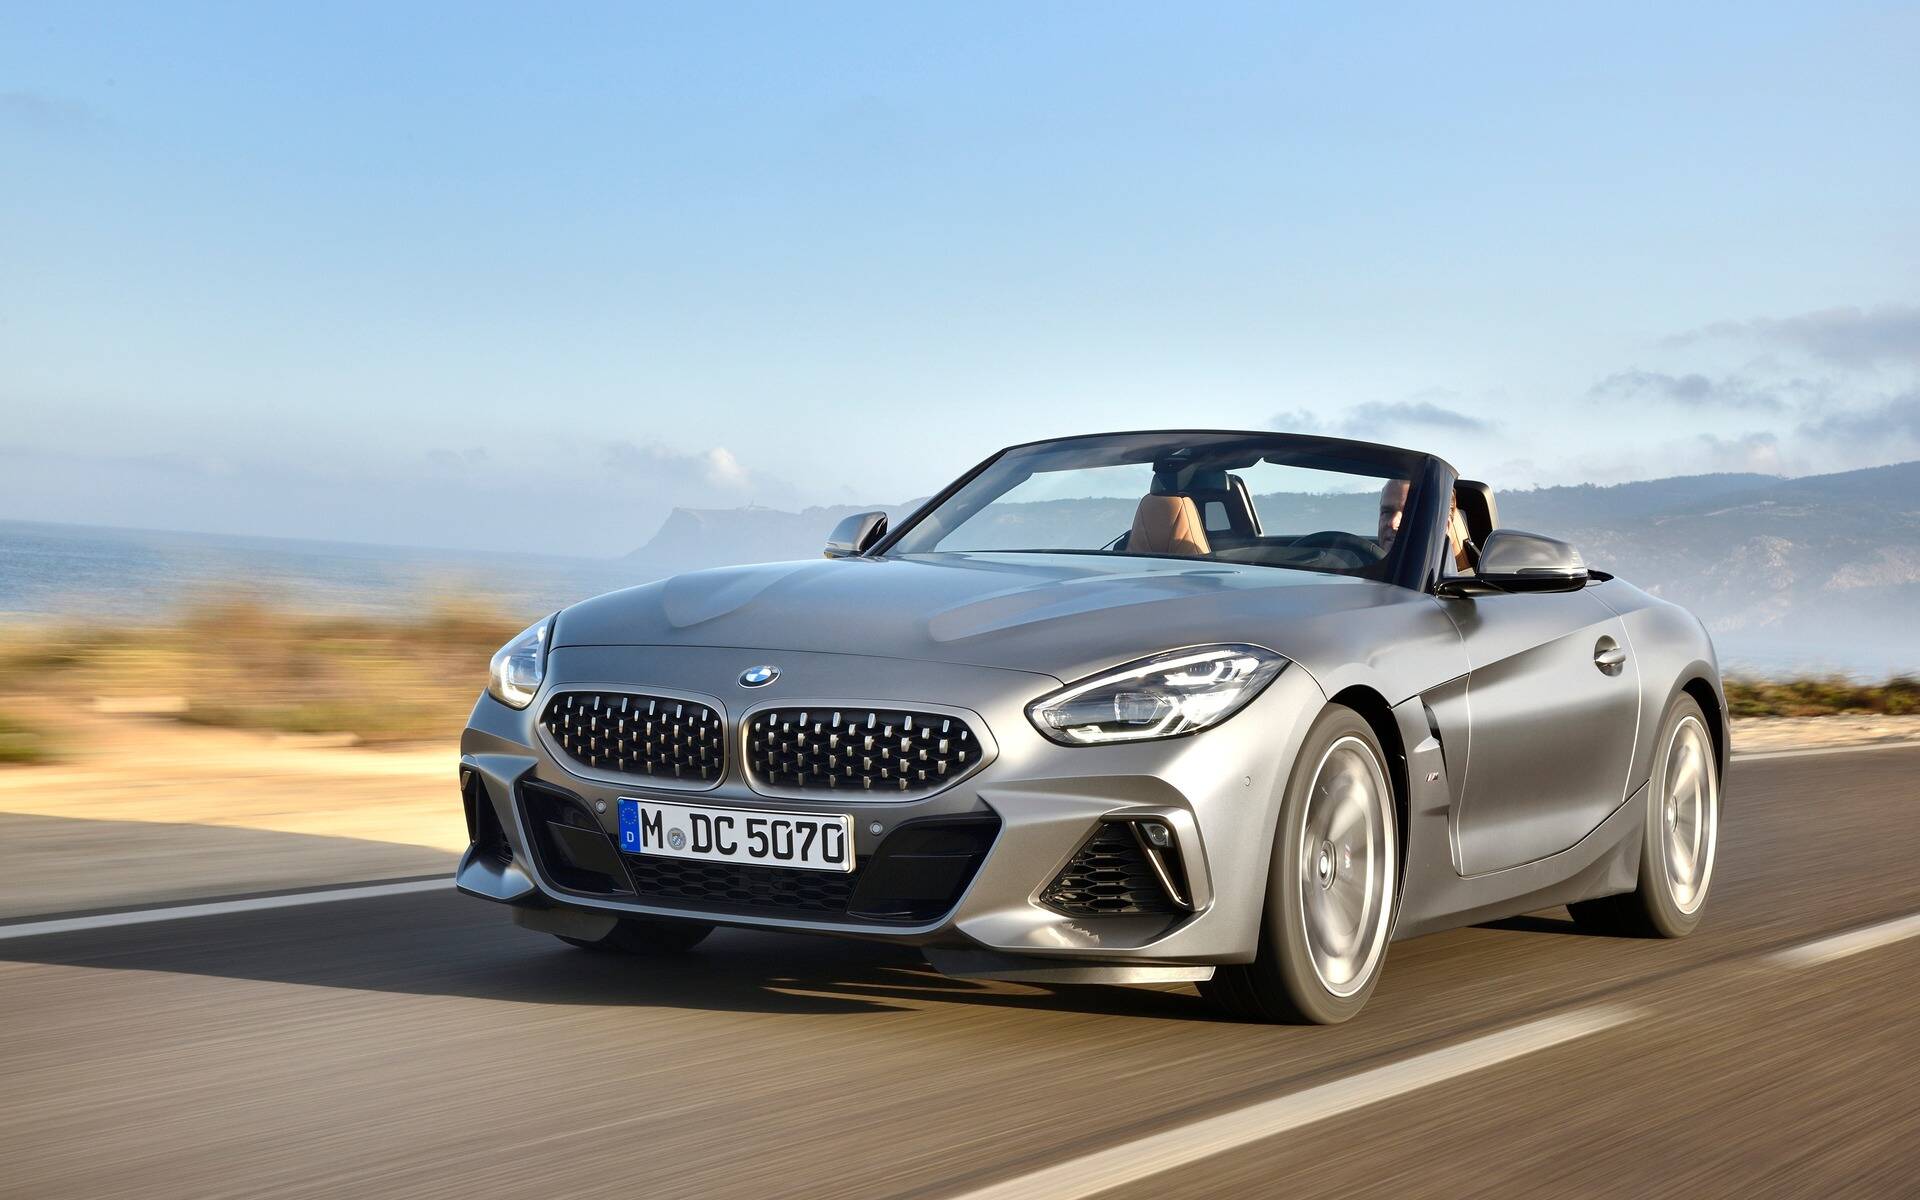 21 Bmw Z4 News Reviews Picture Galleries And Videos The Car Guide